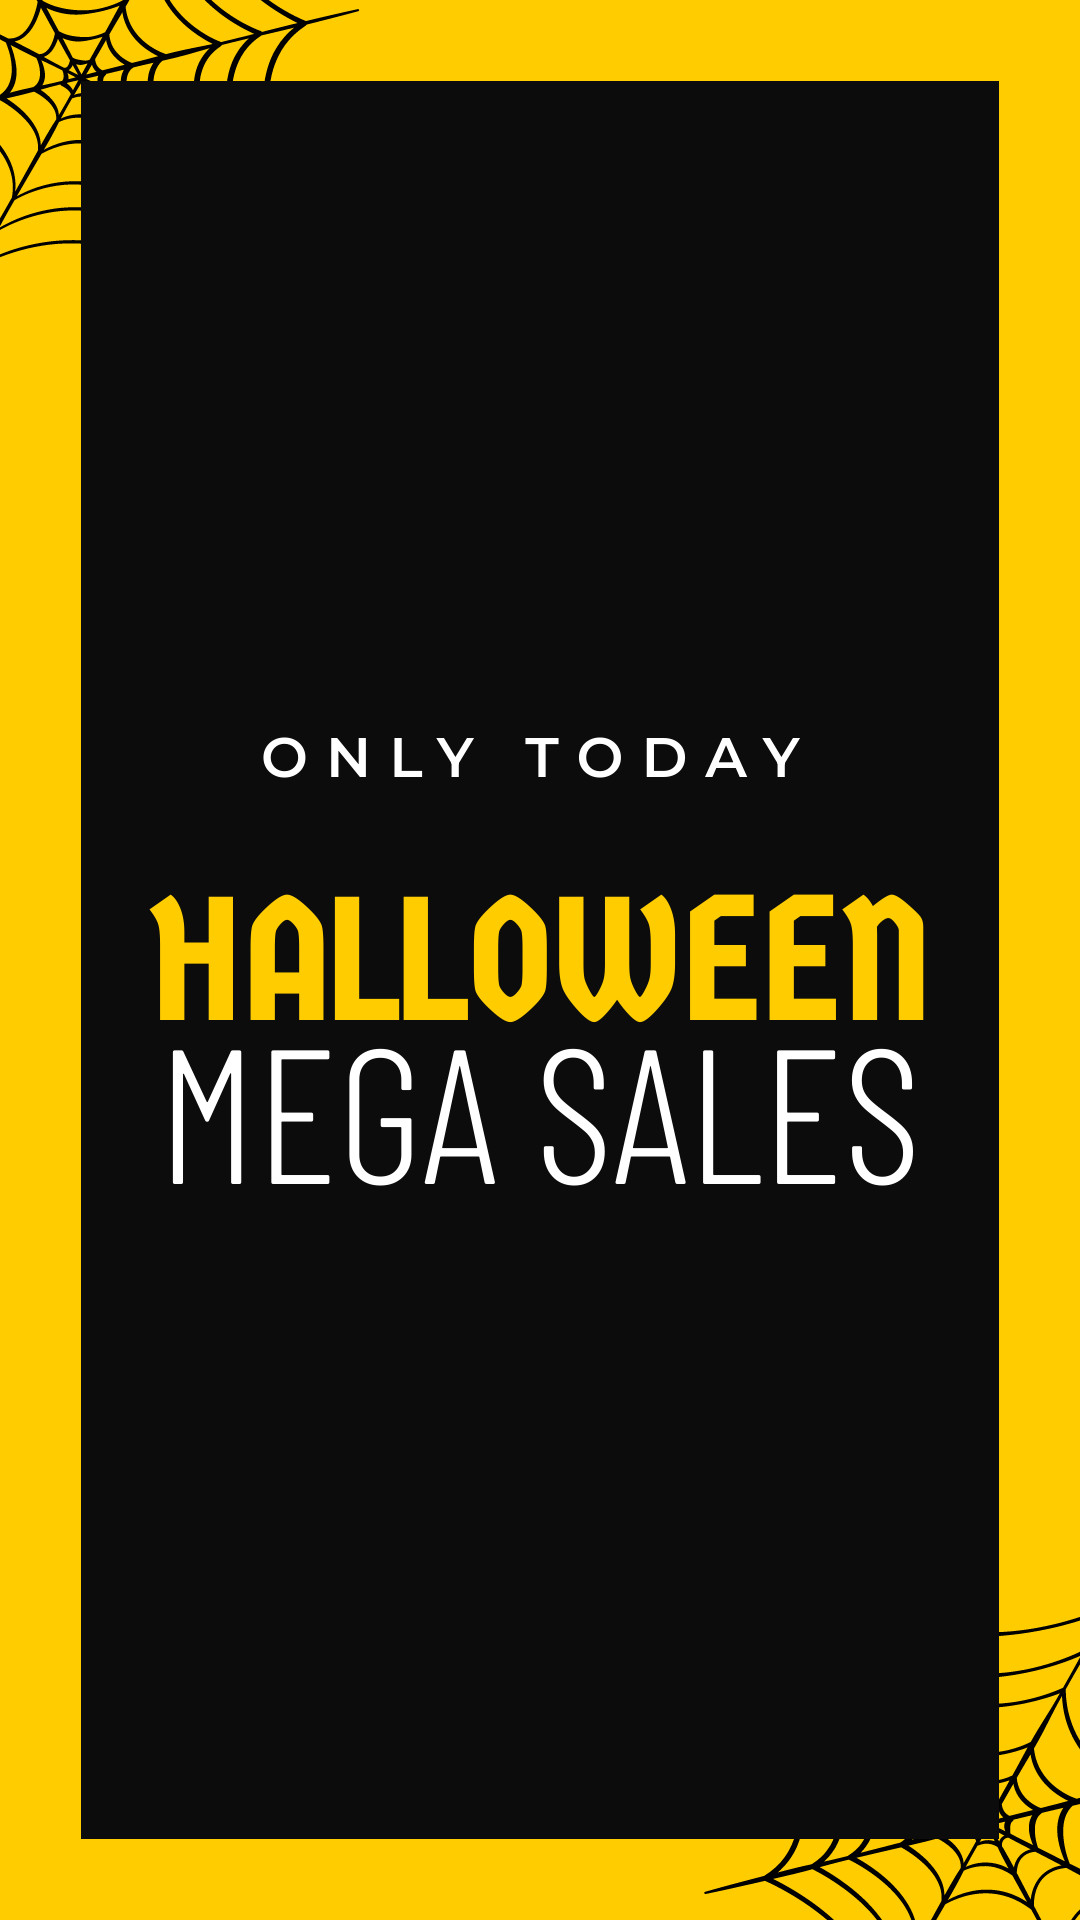 Halloween Mega Sales Only Today Inline Rectangle 300x250